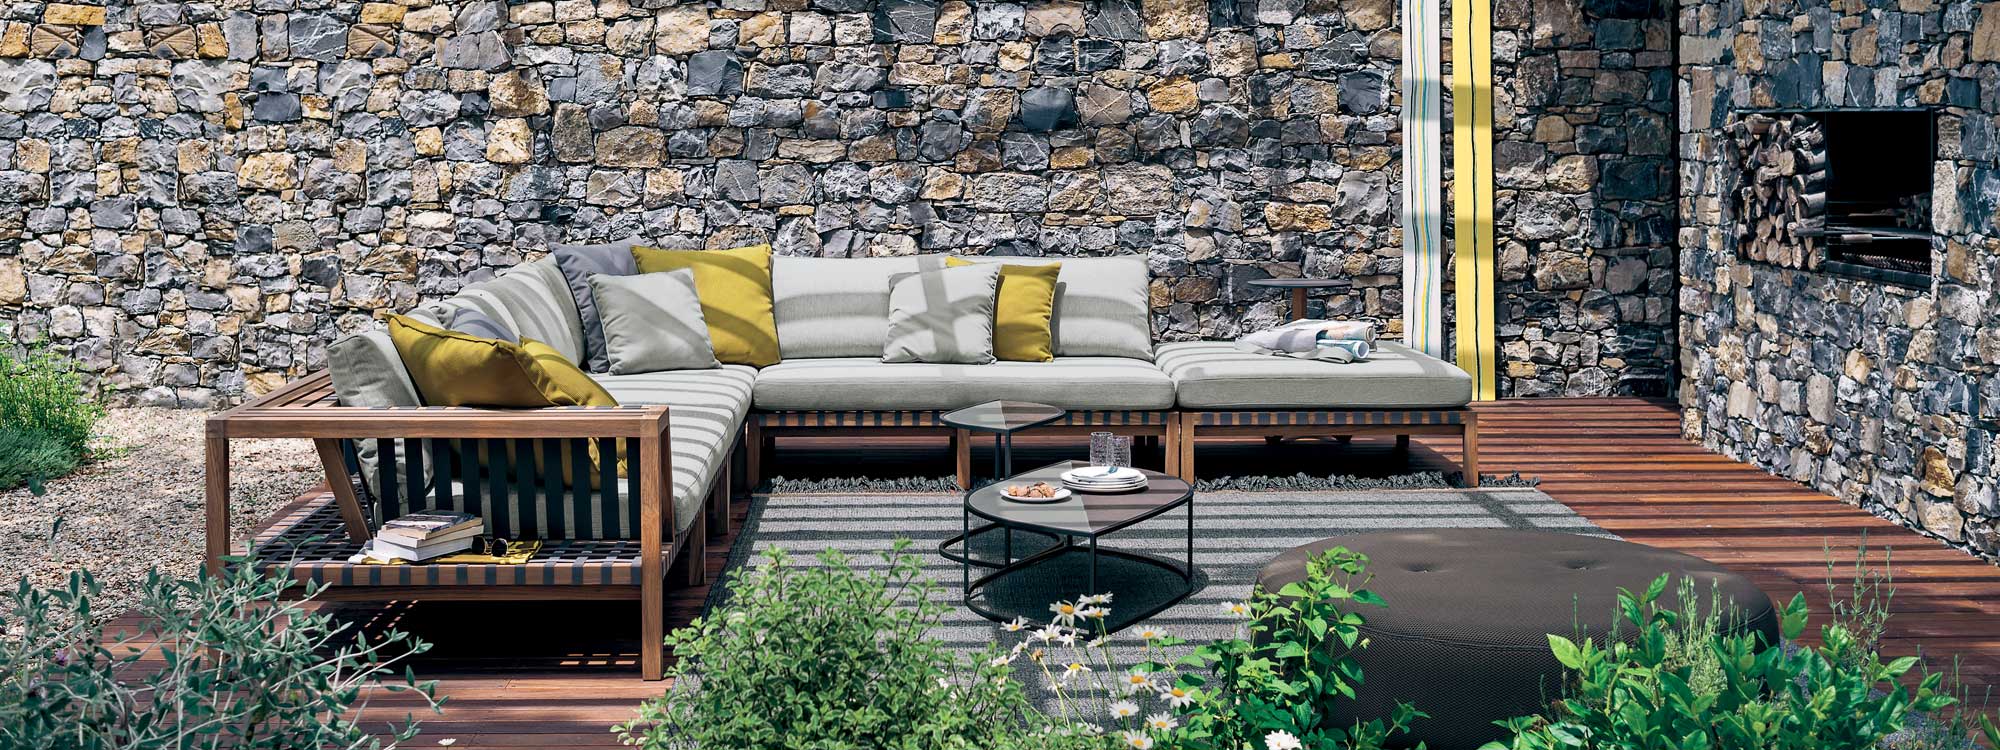 Image of RODA Network teak corner sofa, Leaf outdoor coffee tables and Double round garden pouf on sunny terrace